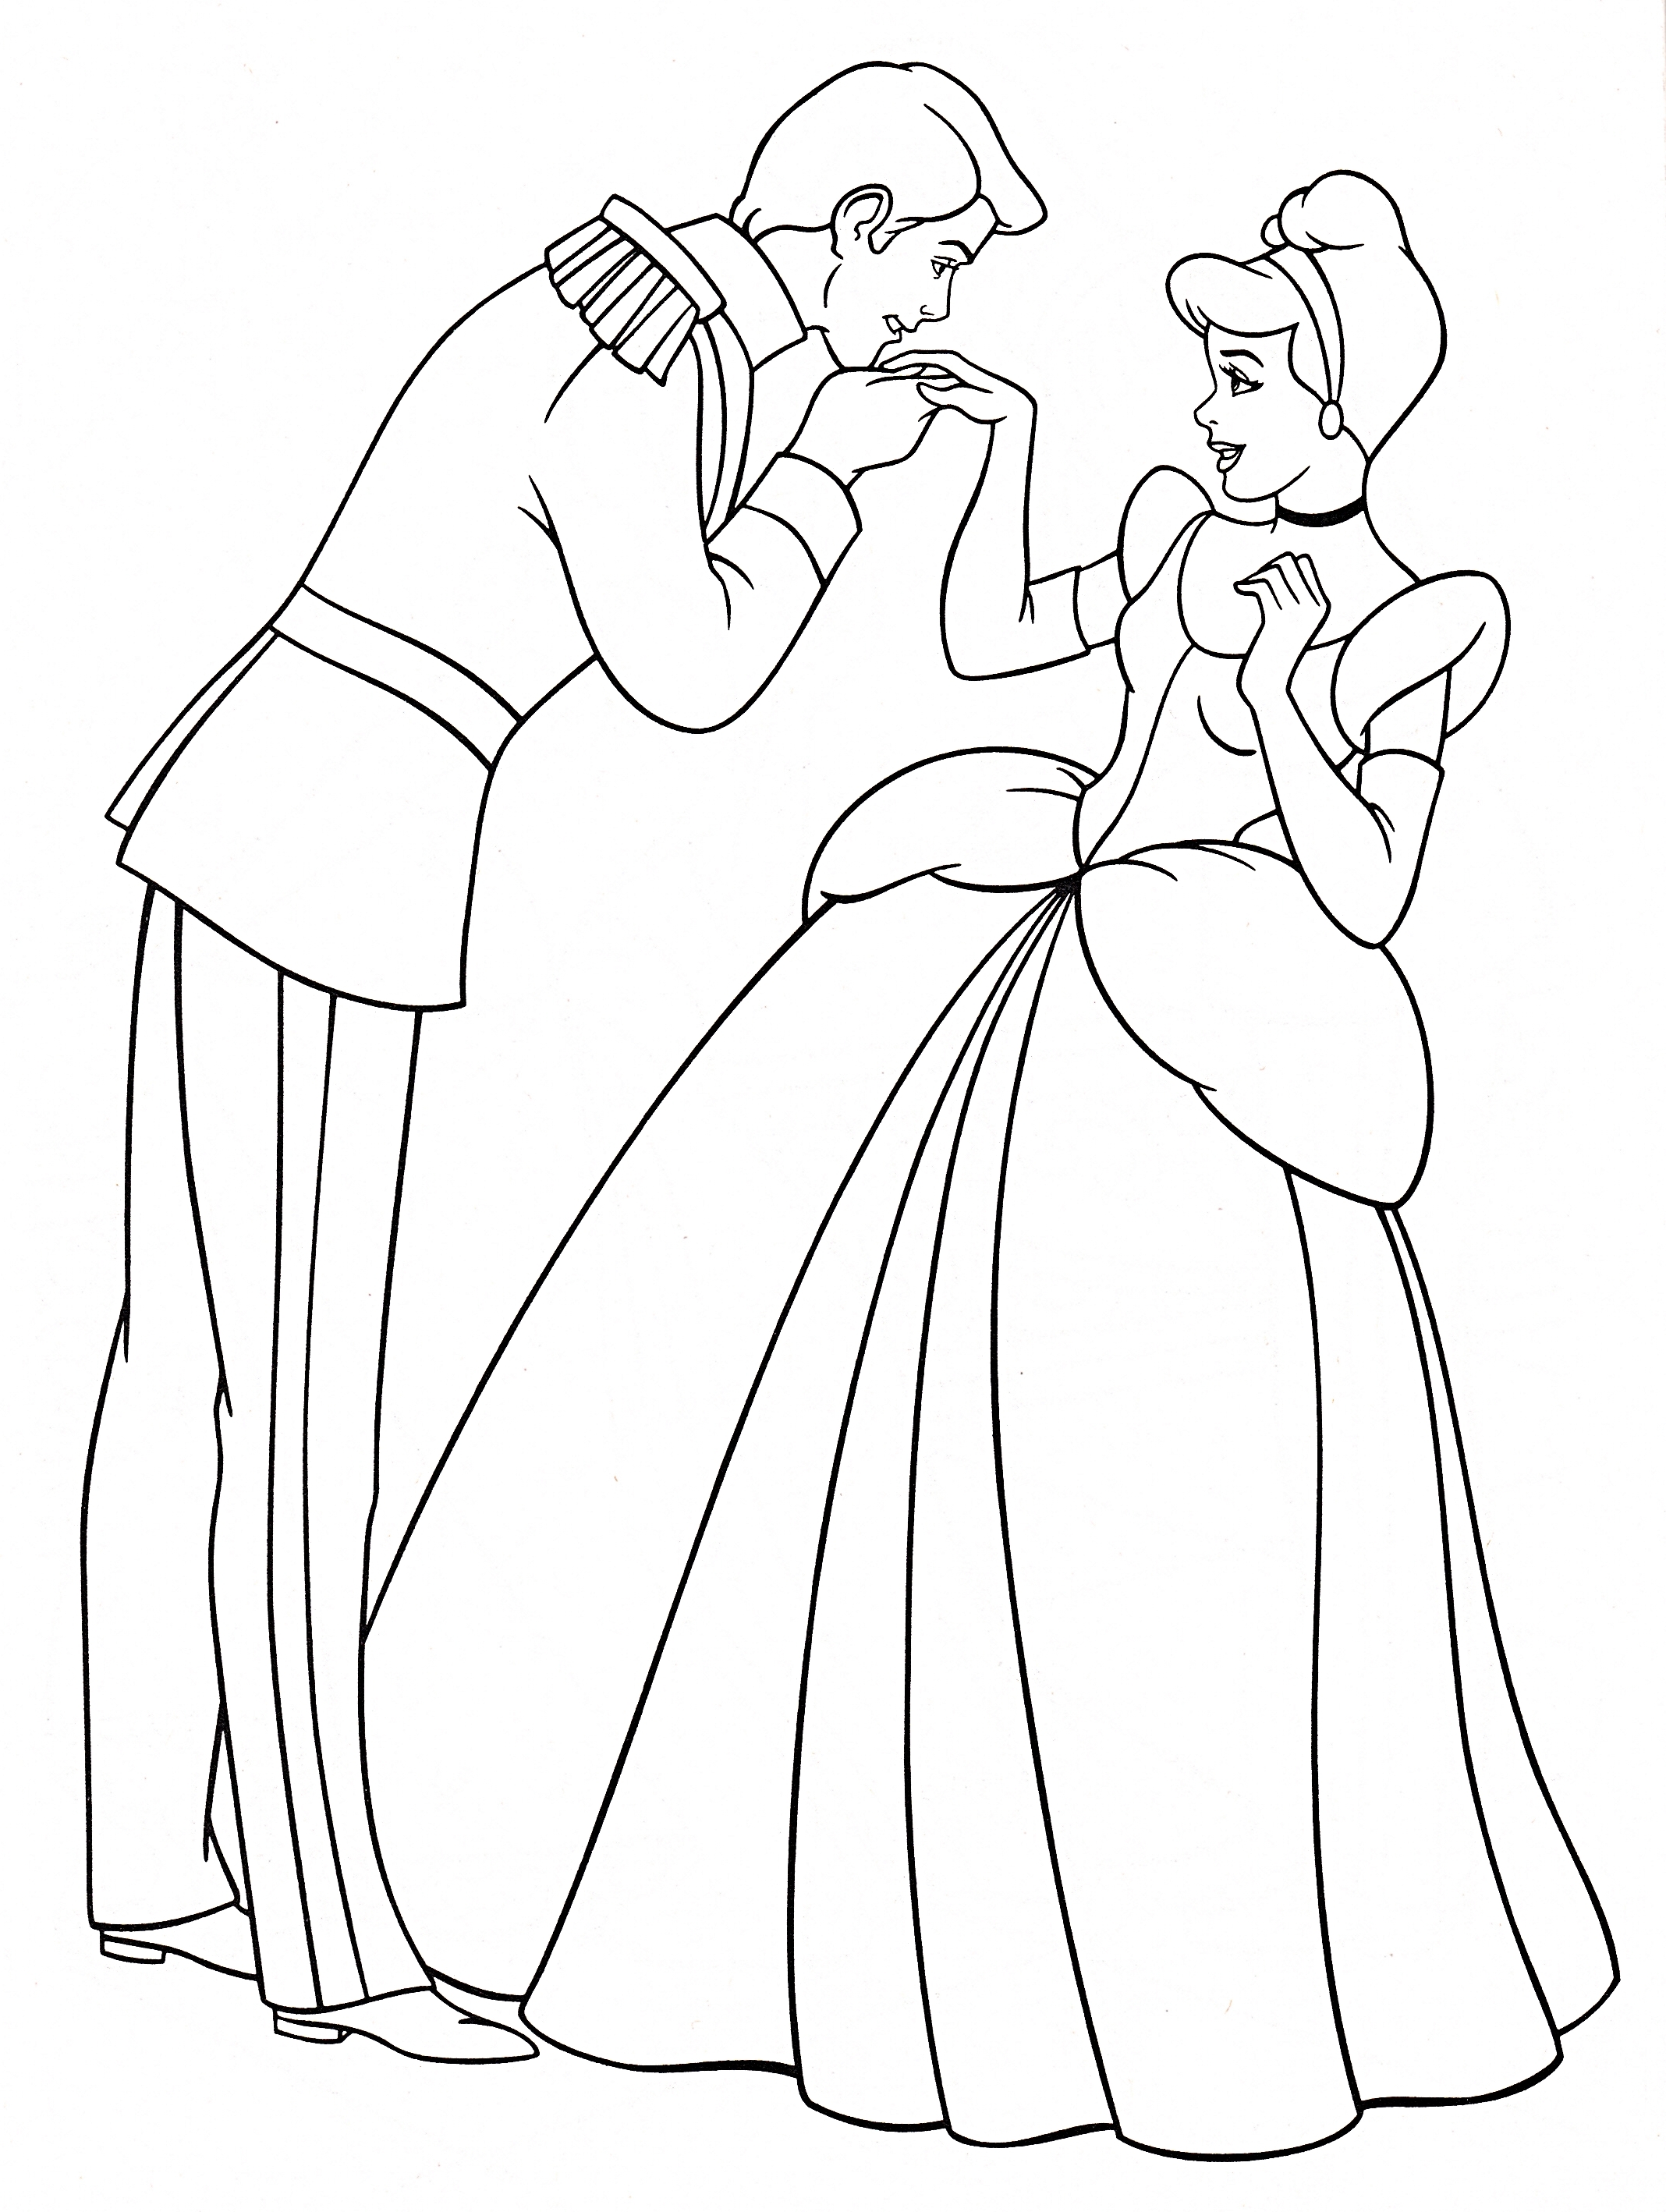 Cinderella Prince Charming Coloring Pages at GetColorings.com | Free ...